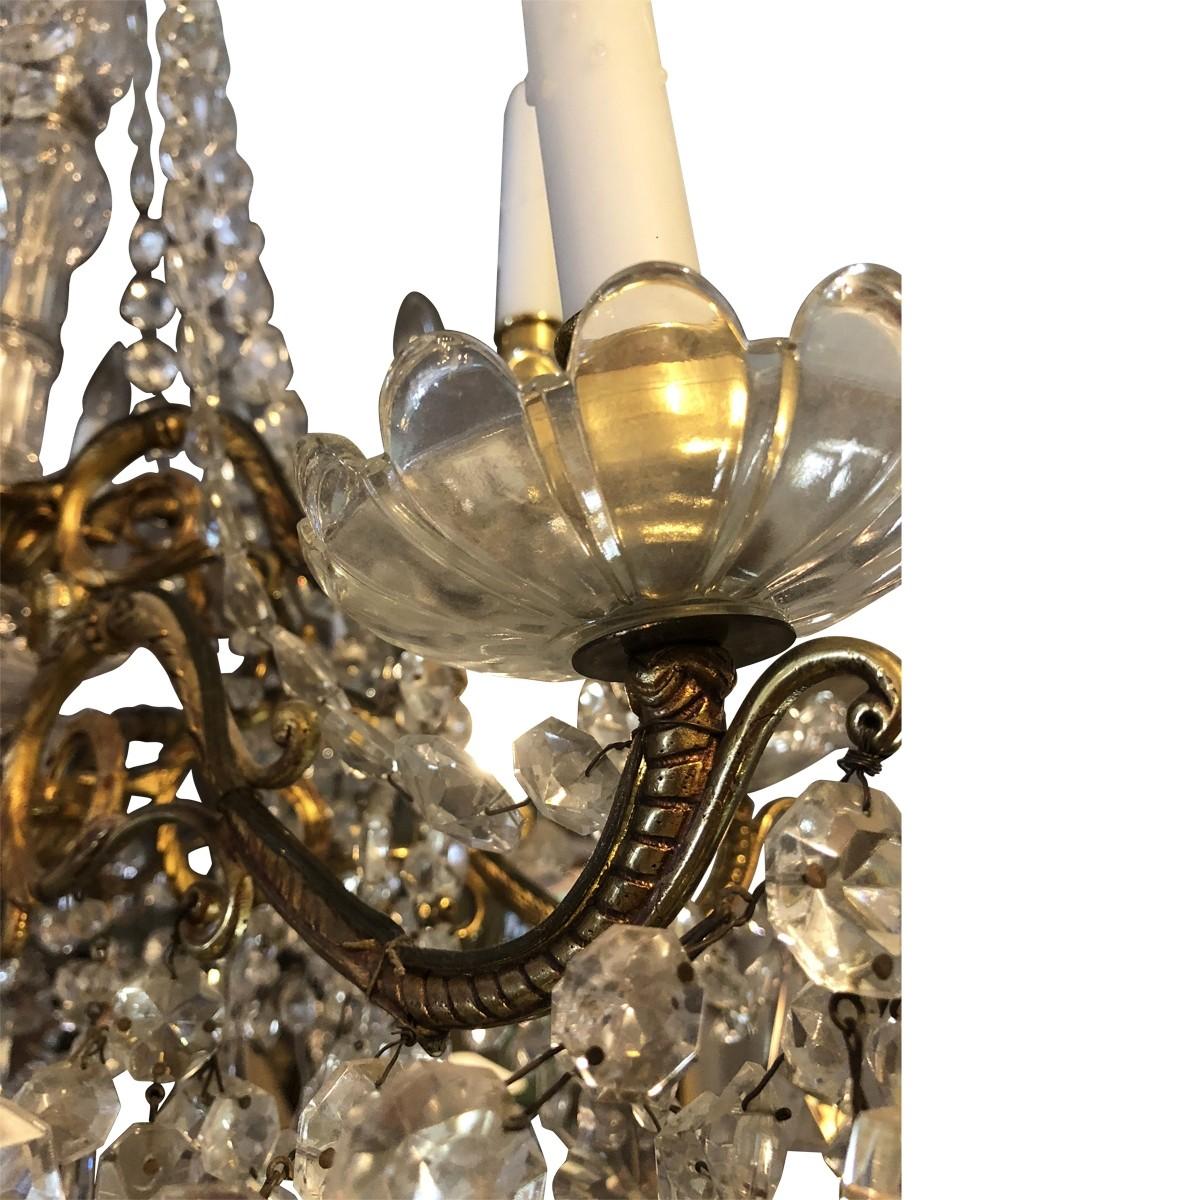 19th century Baccarat beautifully bold and sleek, this extravagant twelve-light Baccarat chandelier has most of its mass made from crystal and the frame is made from bronze gilt. The ball underneath the chandelier provides a touch if elegance and